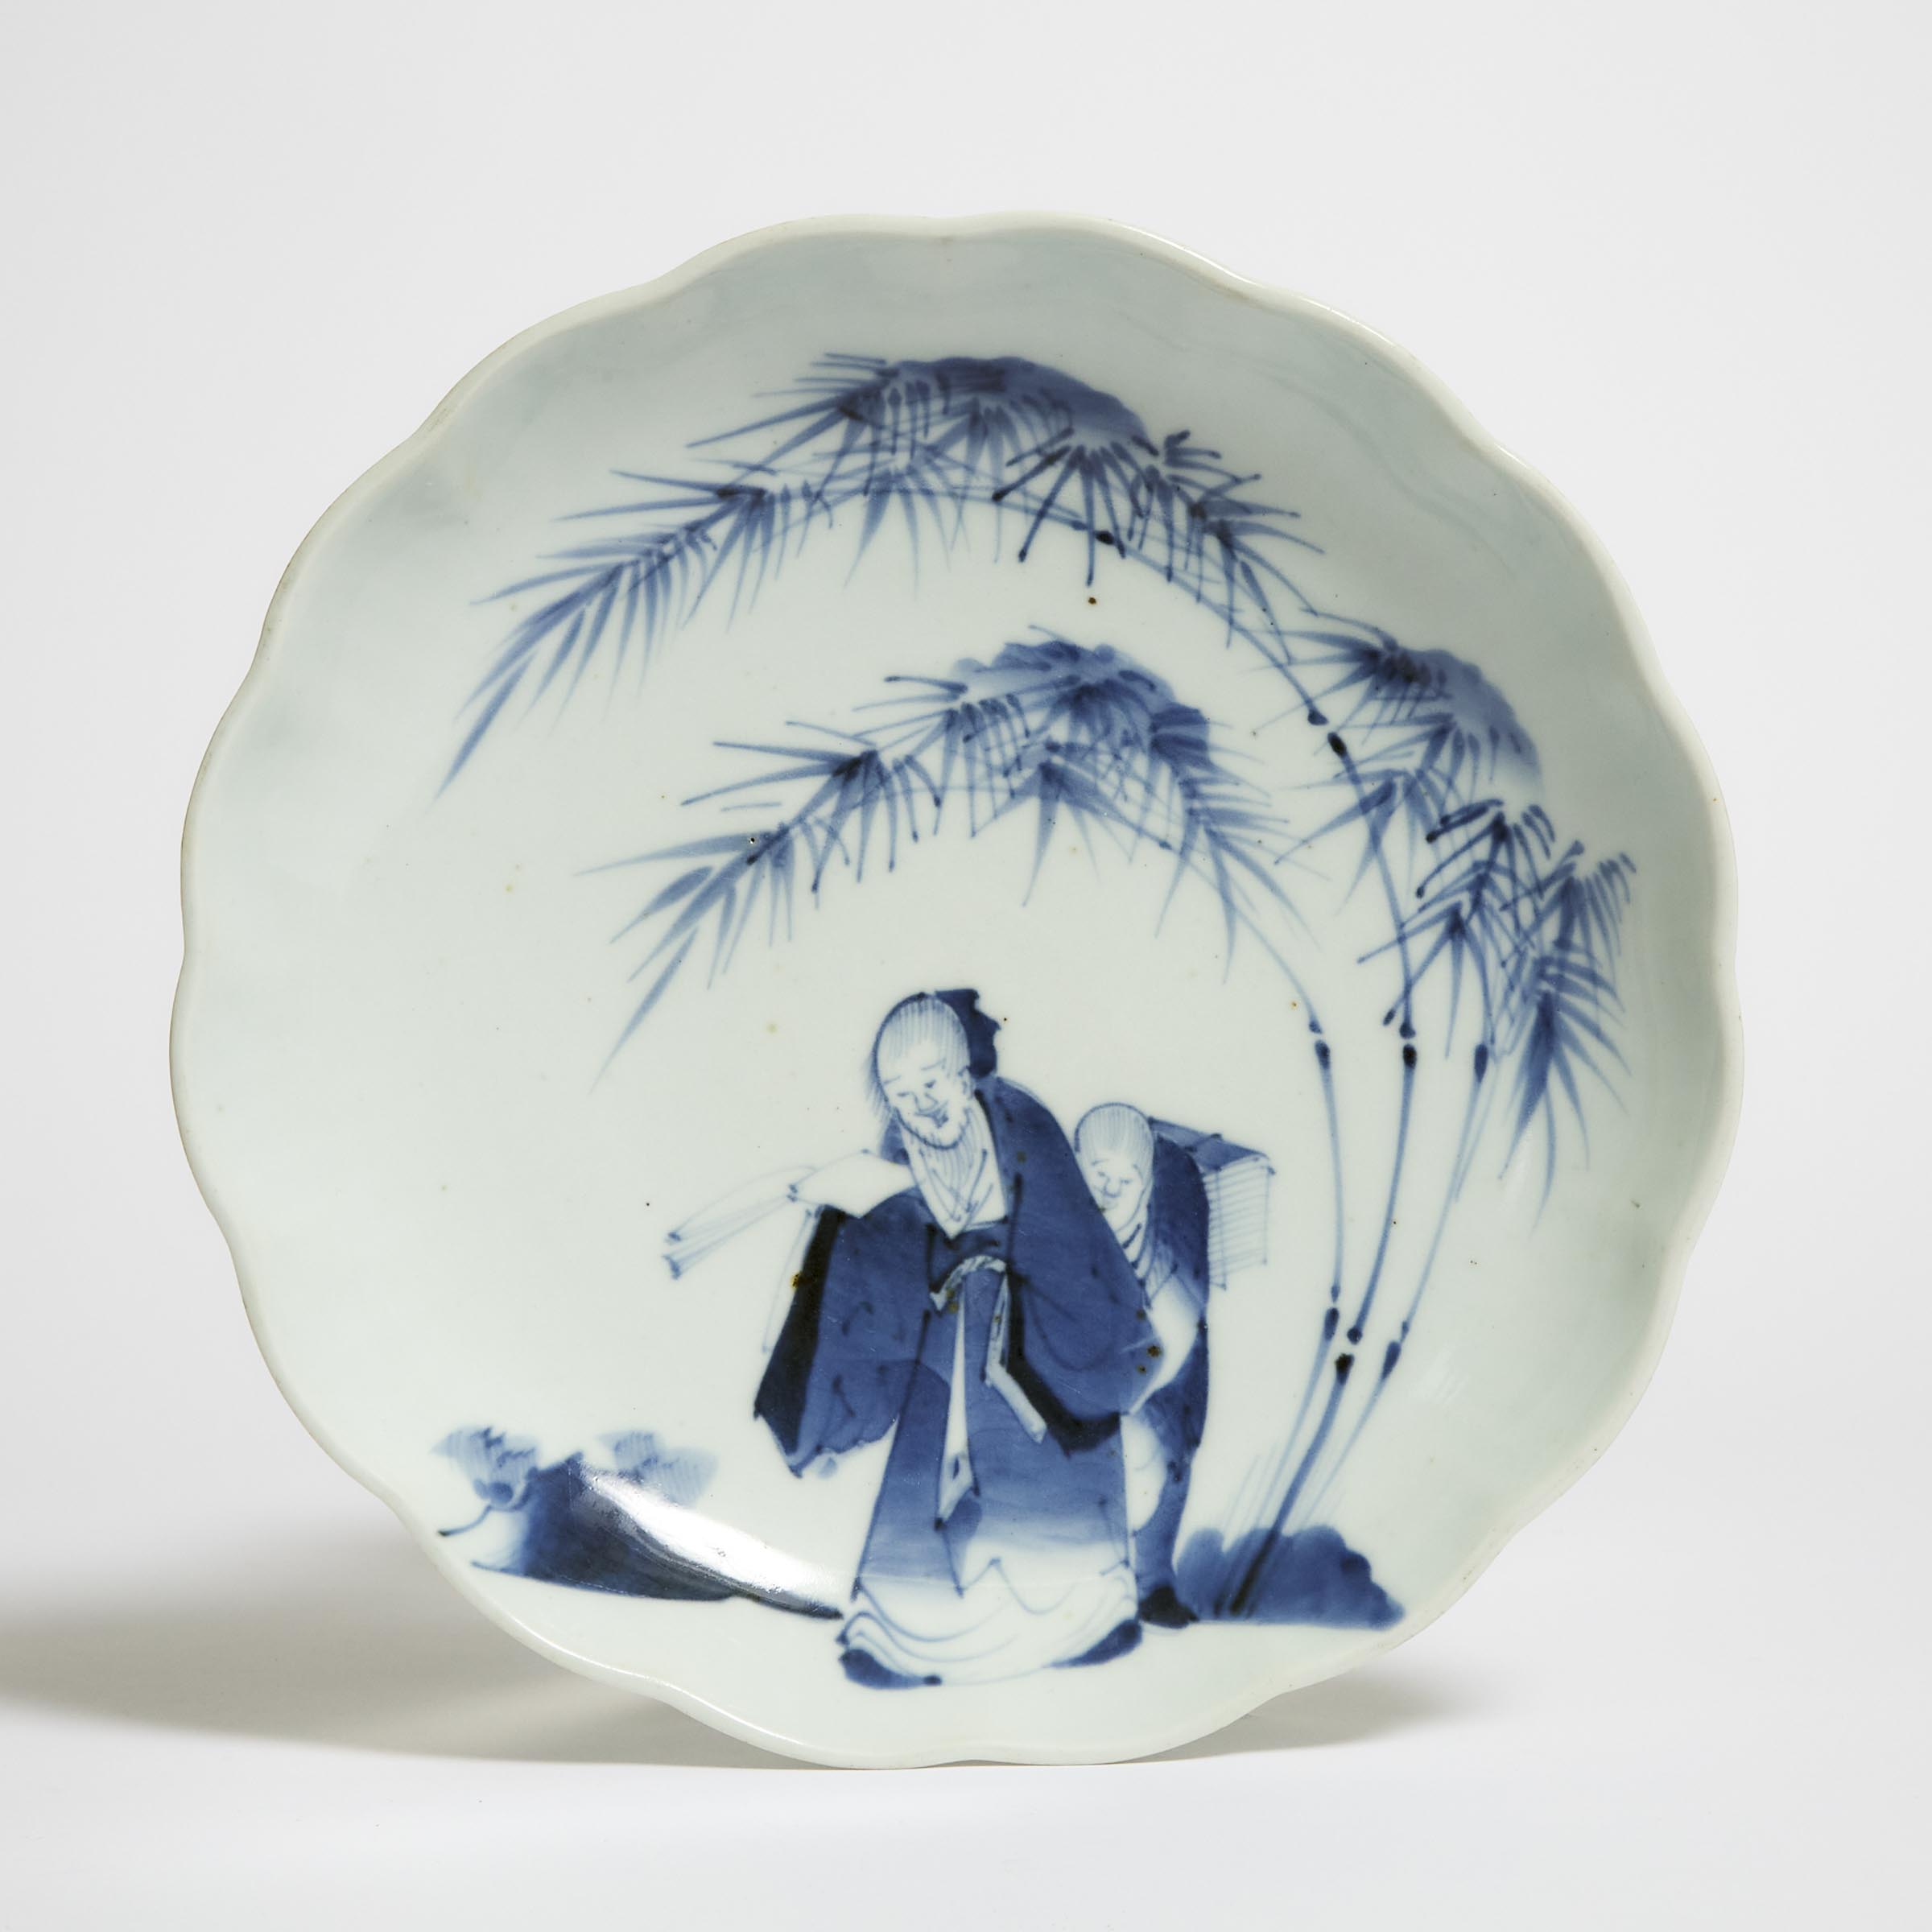 A Japanese Arita Blue and White 'Scholar' Charger, Edo Period, Early 19th Century